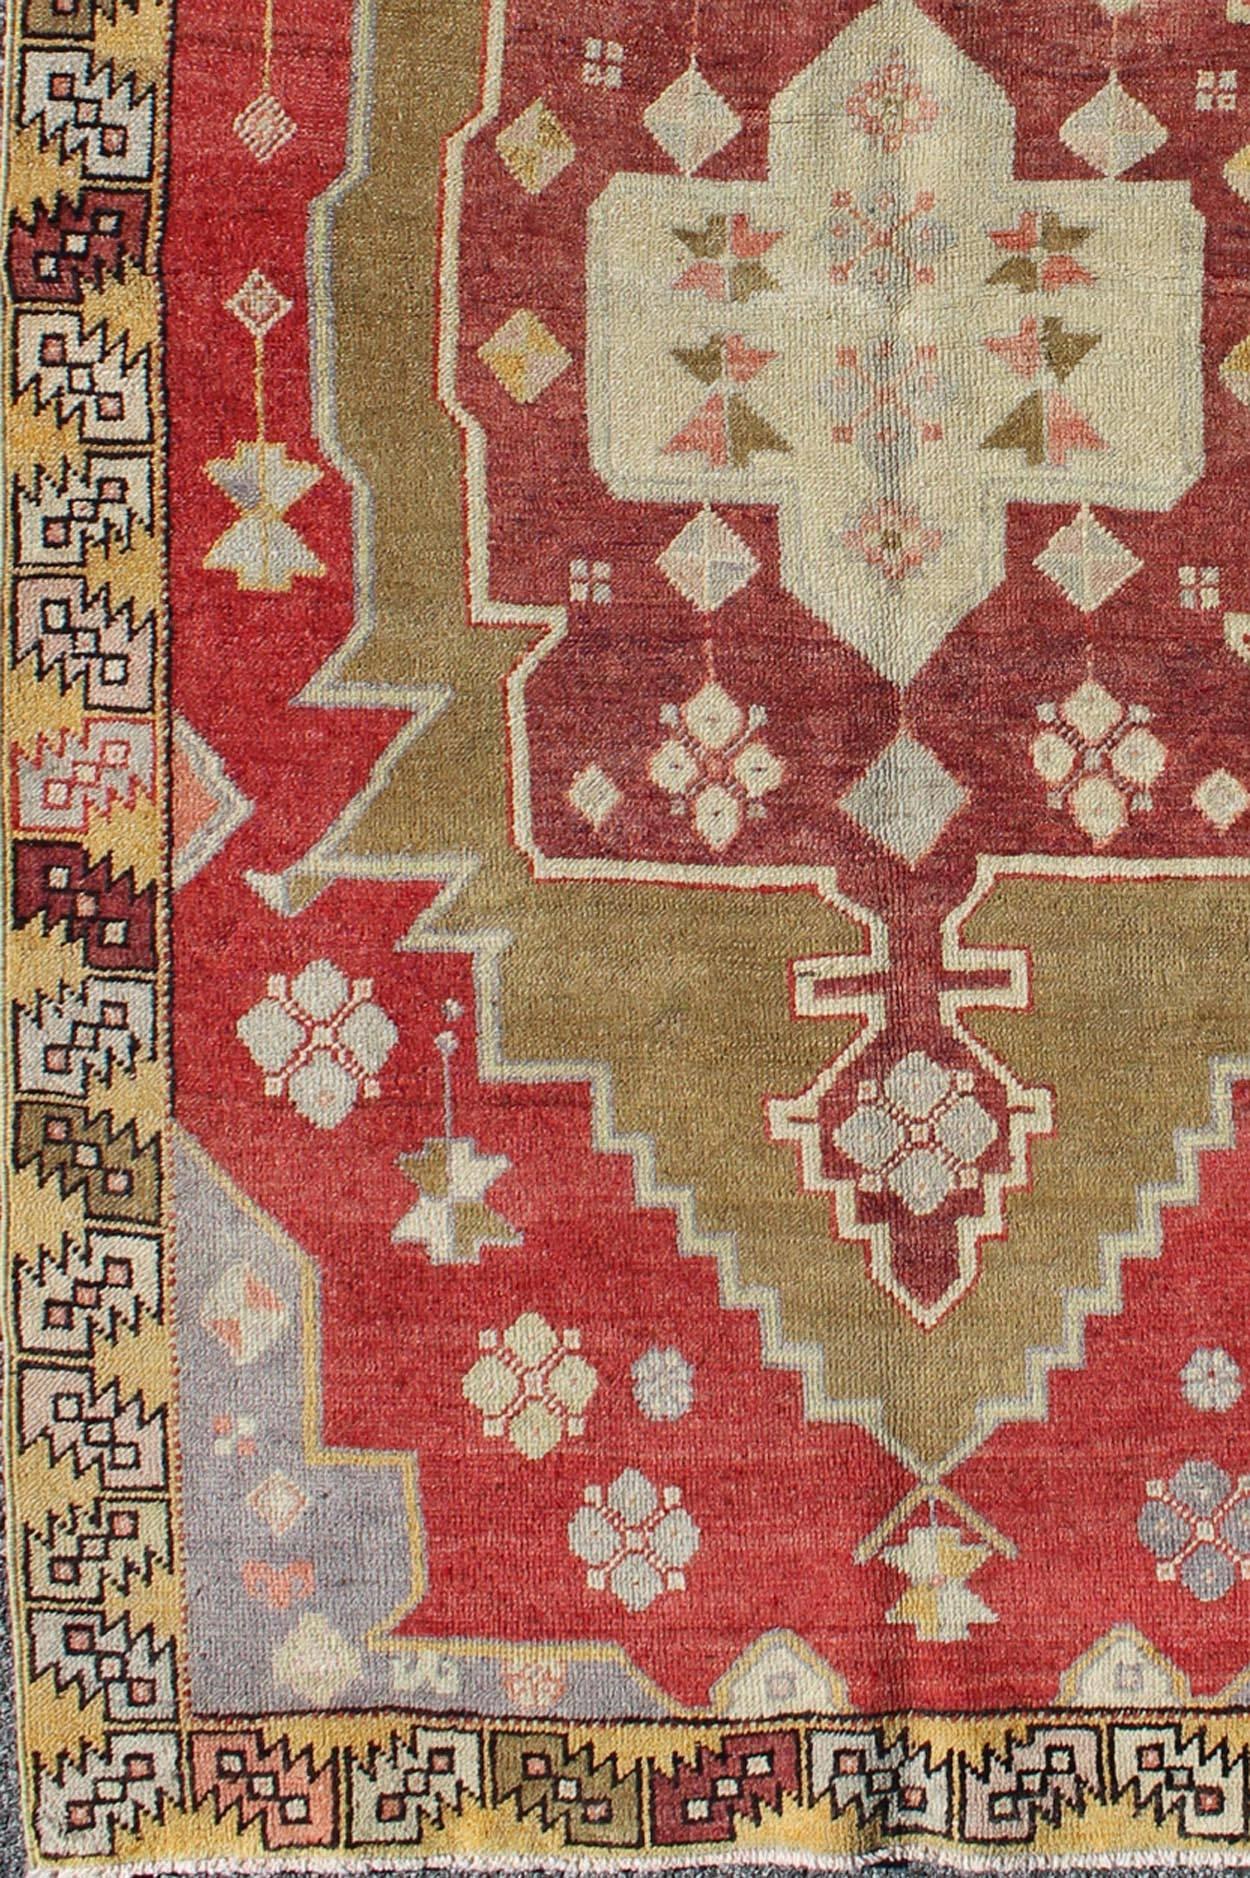 Unique vintage Turkish Oushak rug with geometric medallion in red, green, yellow, rug mtu-3468, country of origin / type: Turkey / Oushak, circa mid-20th century

This vintage Turkish Oushak rug (circa mid-20th century) features a unique blend of